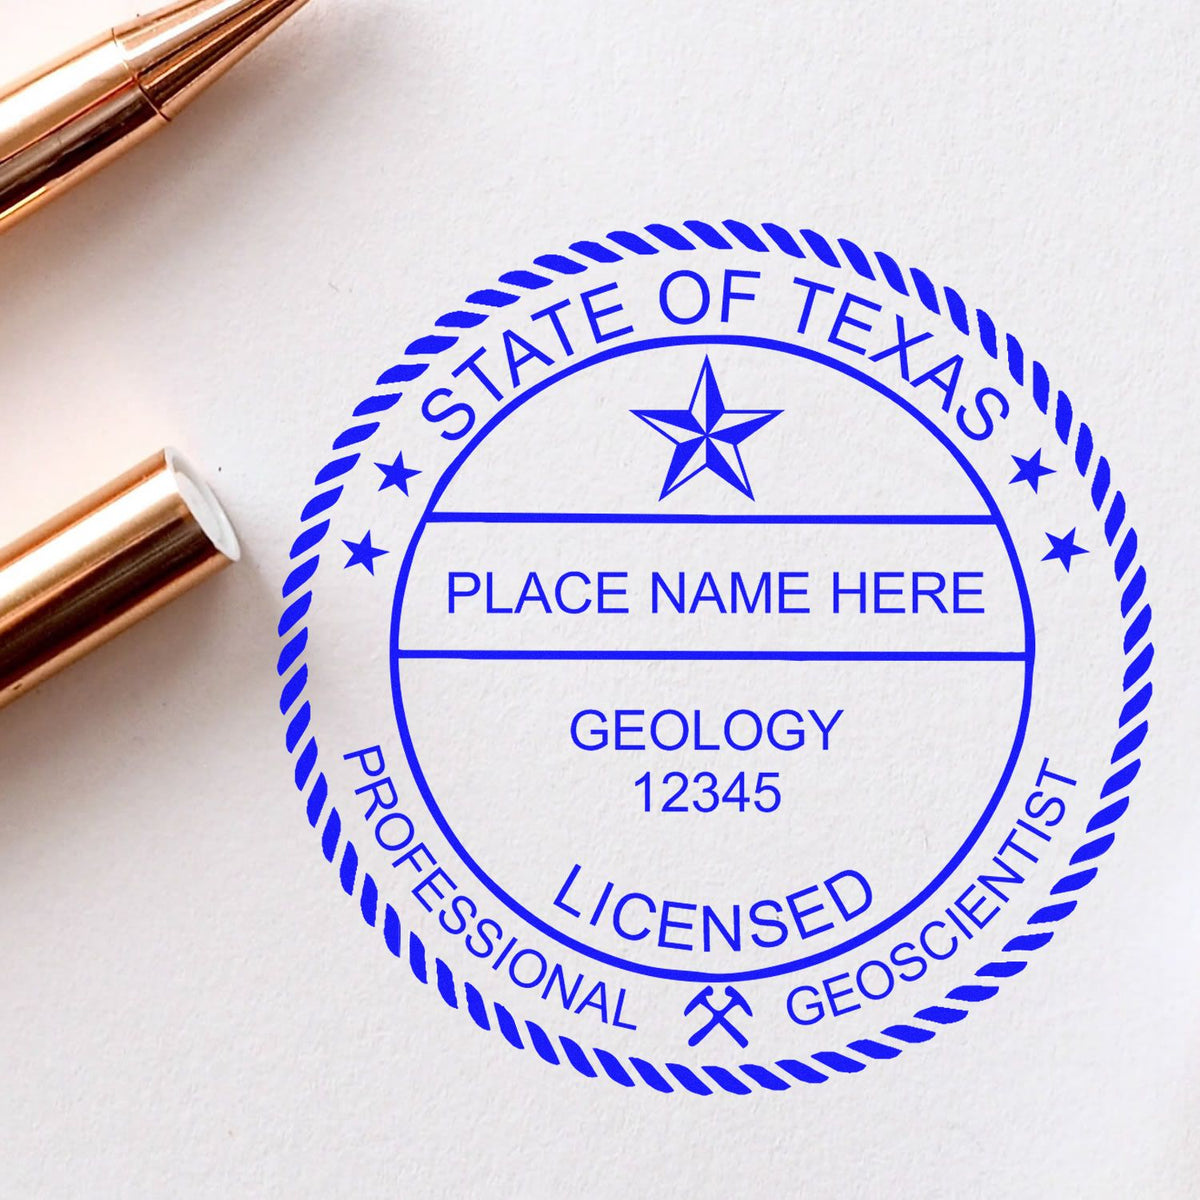 An alternative view of the Texas Professional Geologist Seal Stamp stamped on a sheet of paper showing the image in use